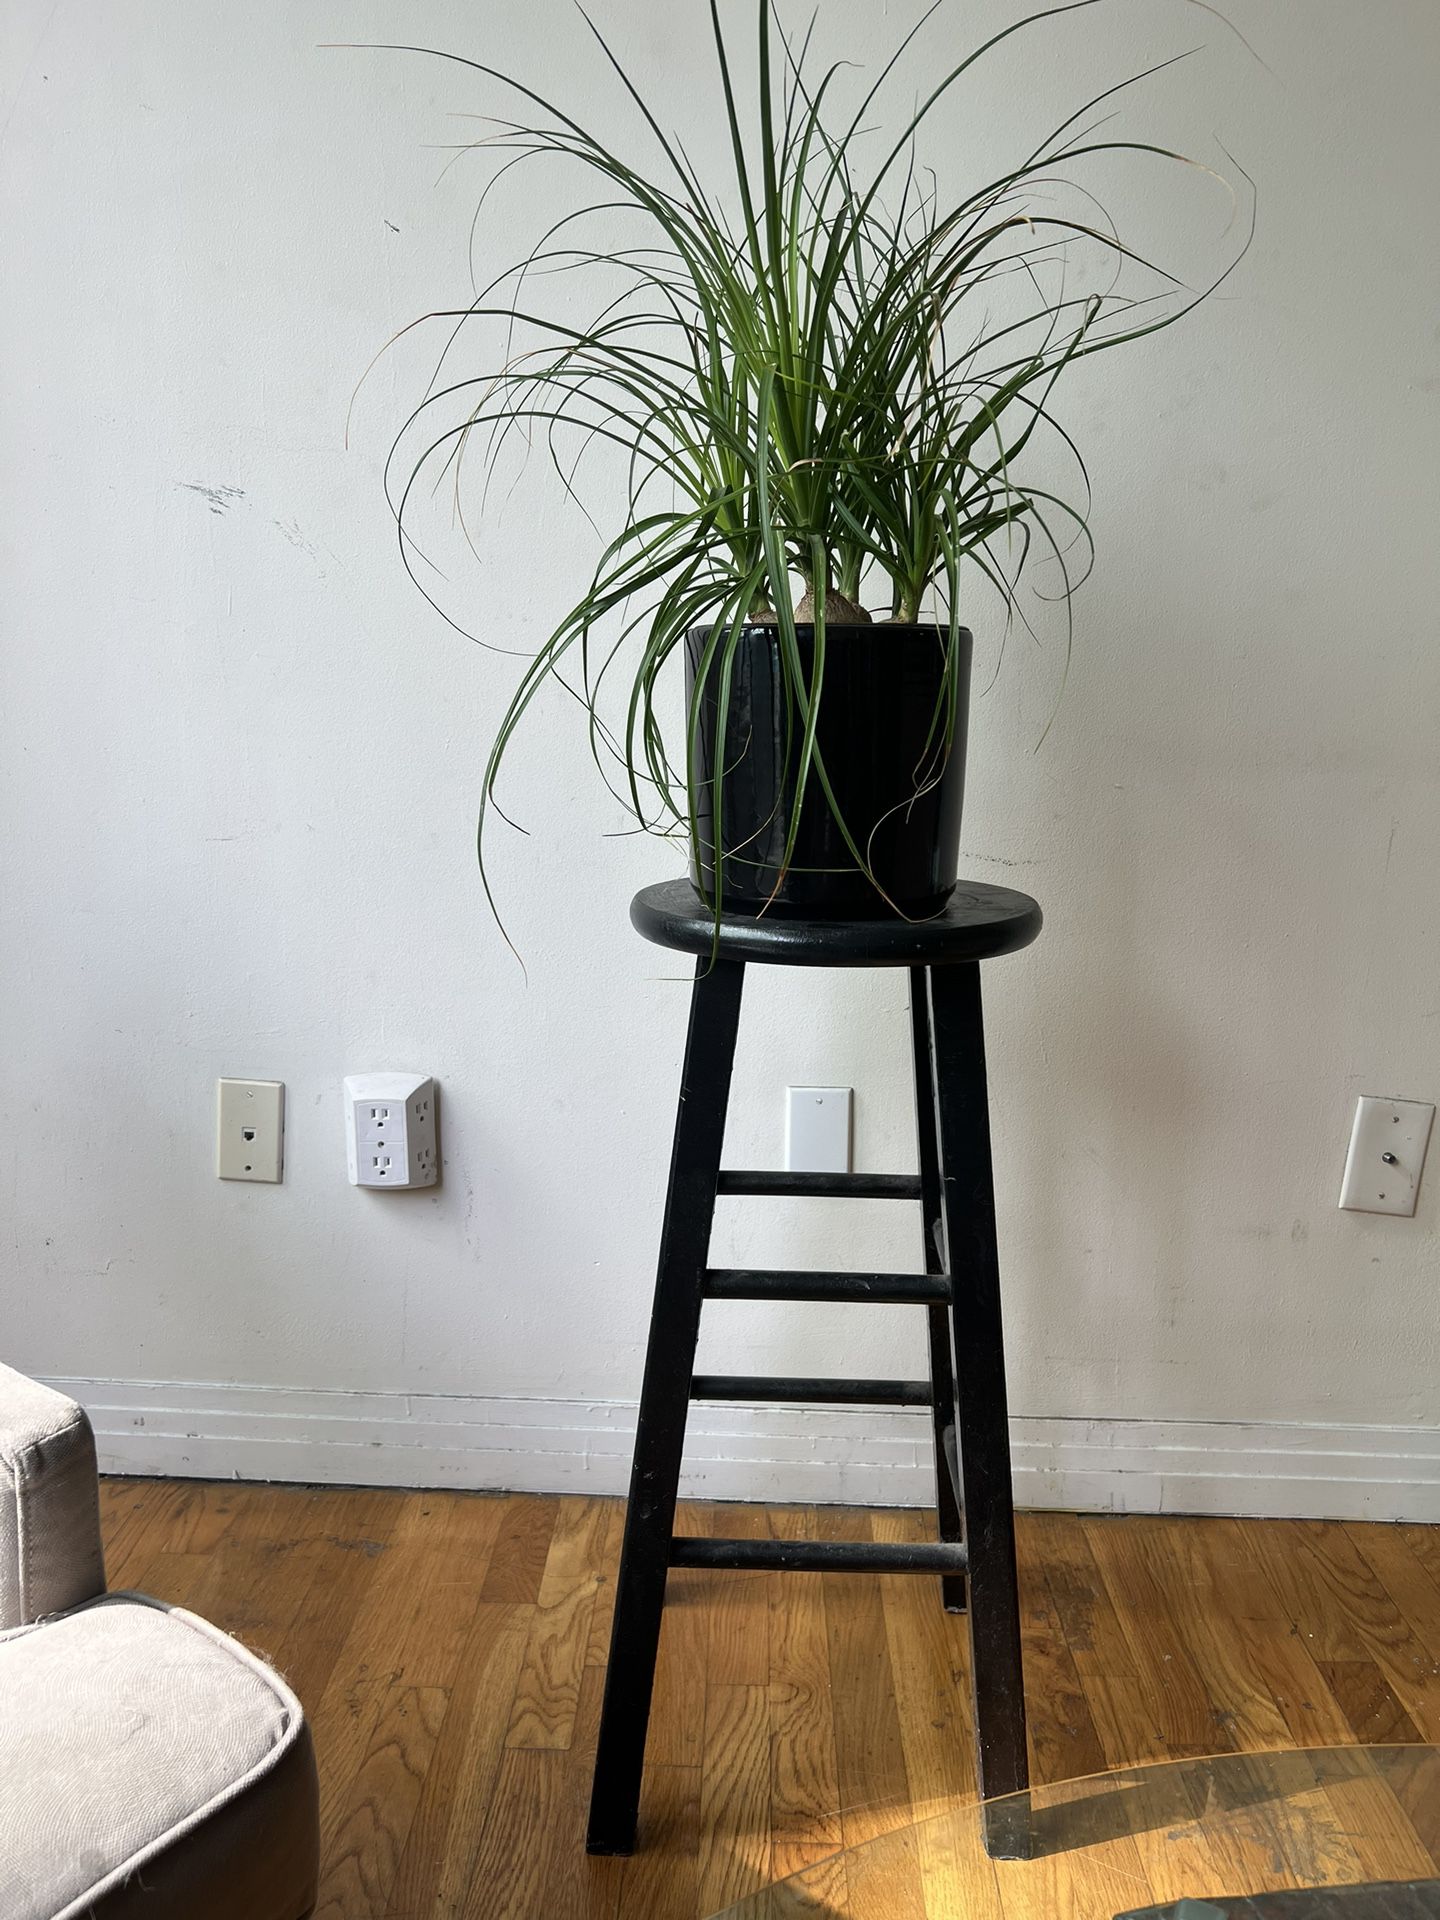 Stool With Large Plant